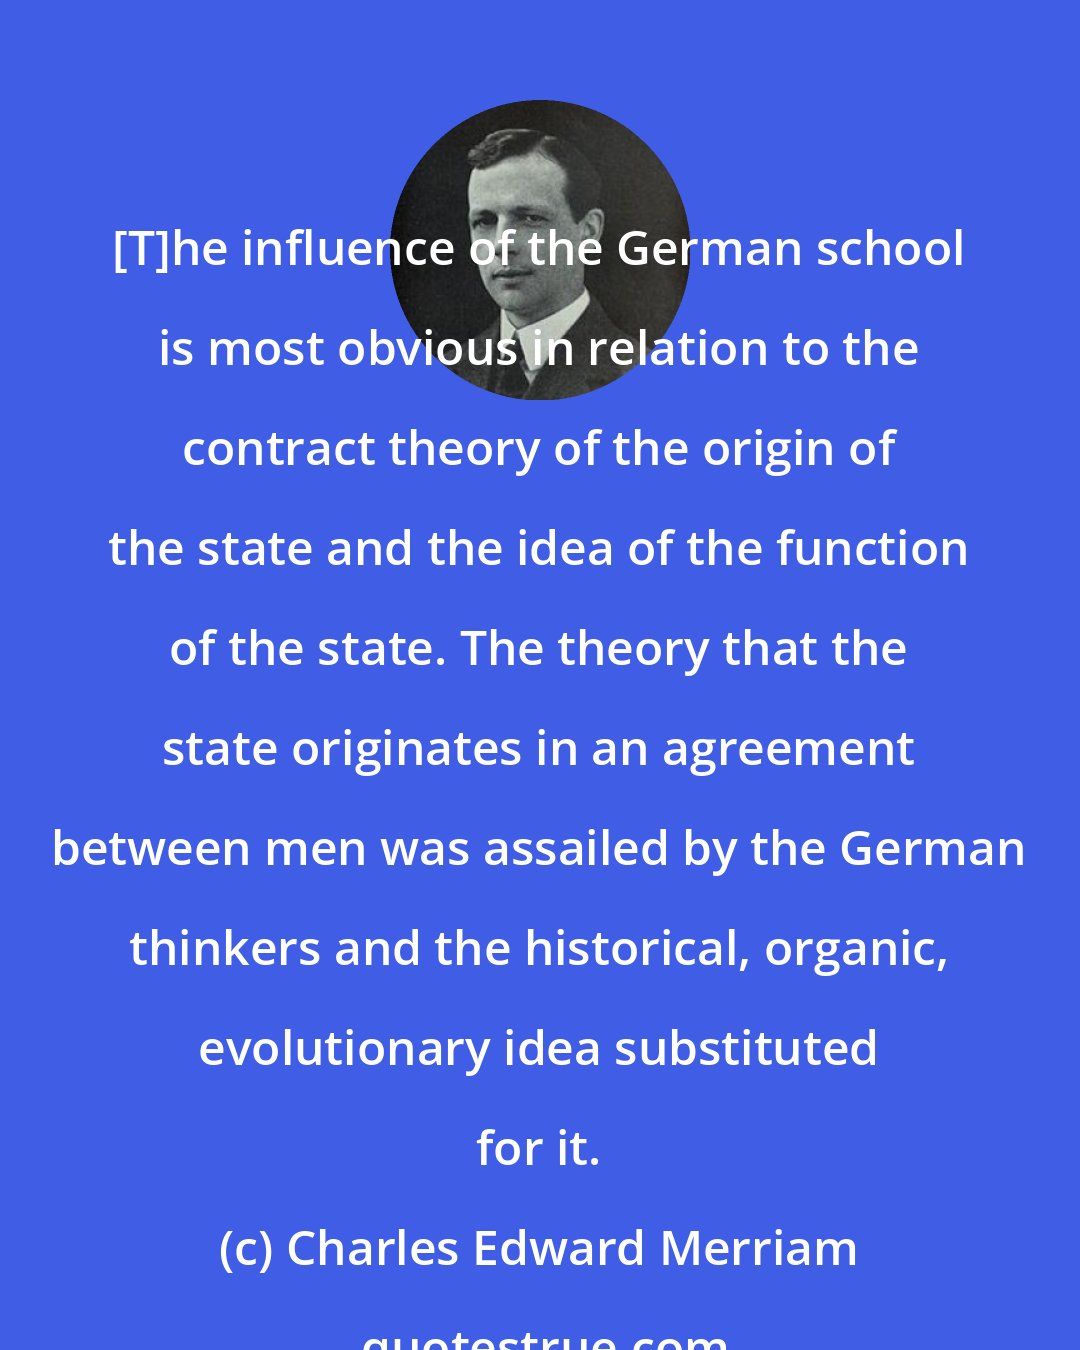 Charles Edward Merriam: [T]he influence of the German school is most obvious in relation to the contract theory of the origin of the state and the idea of the function of the state. The theory that the state originates in an agreement between men was assailed by the German thinkers and the historical, organic, evolutionary idea substituted for it.